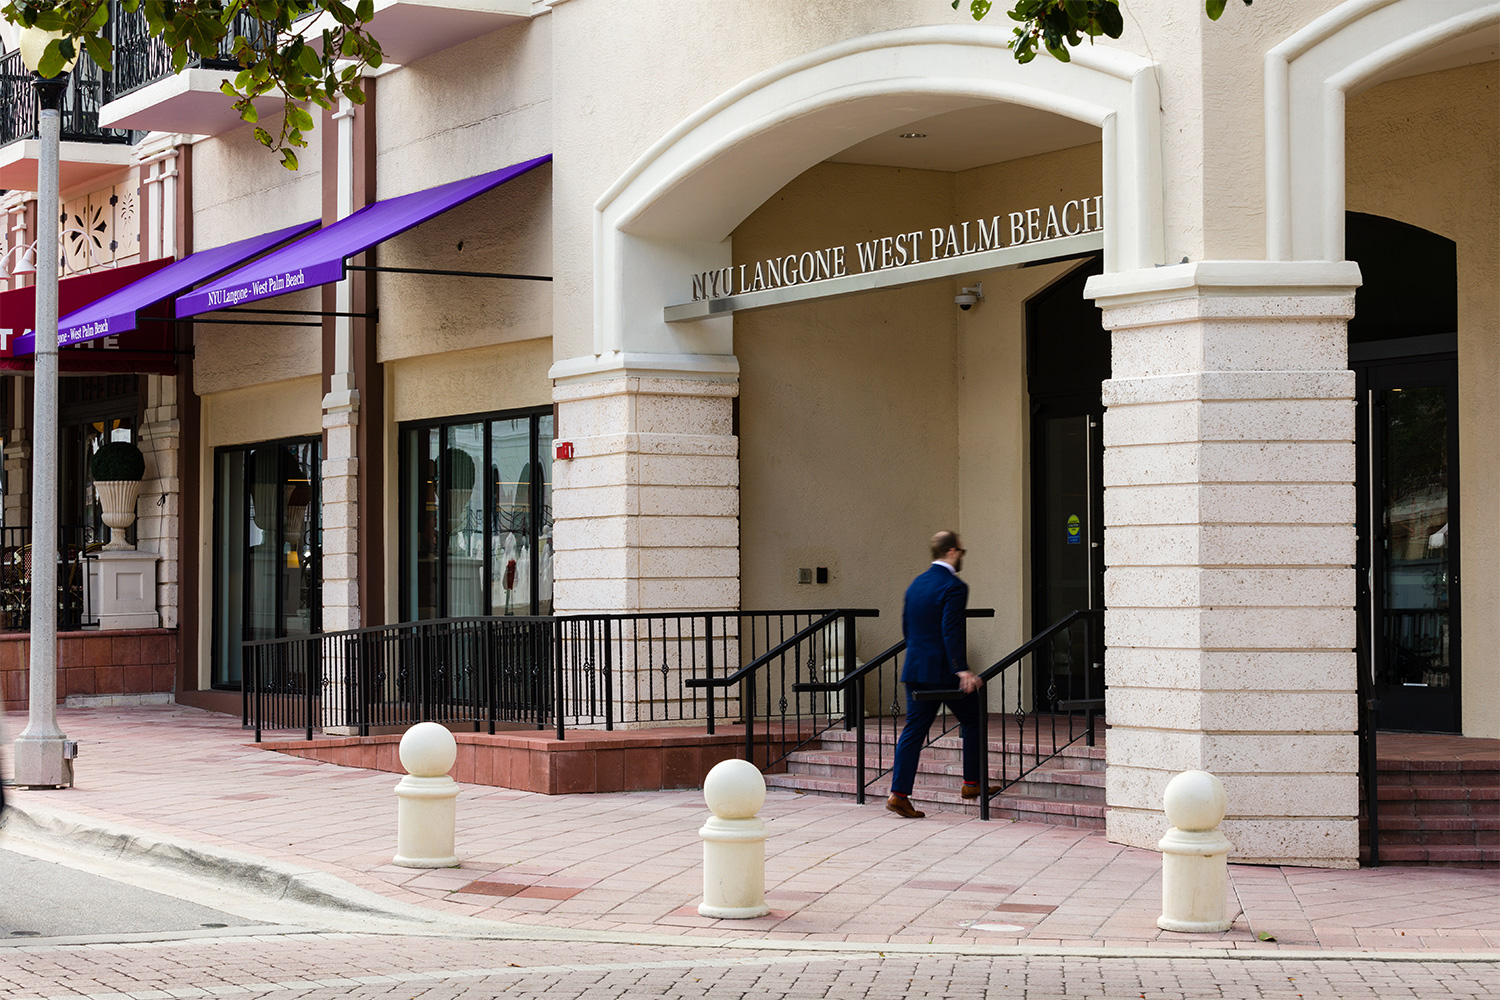 WPBF 25 News: NYU Langone Brings New Services to West Palm Beach